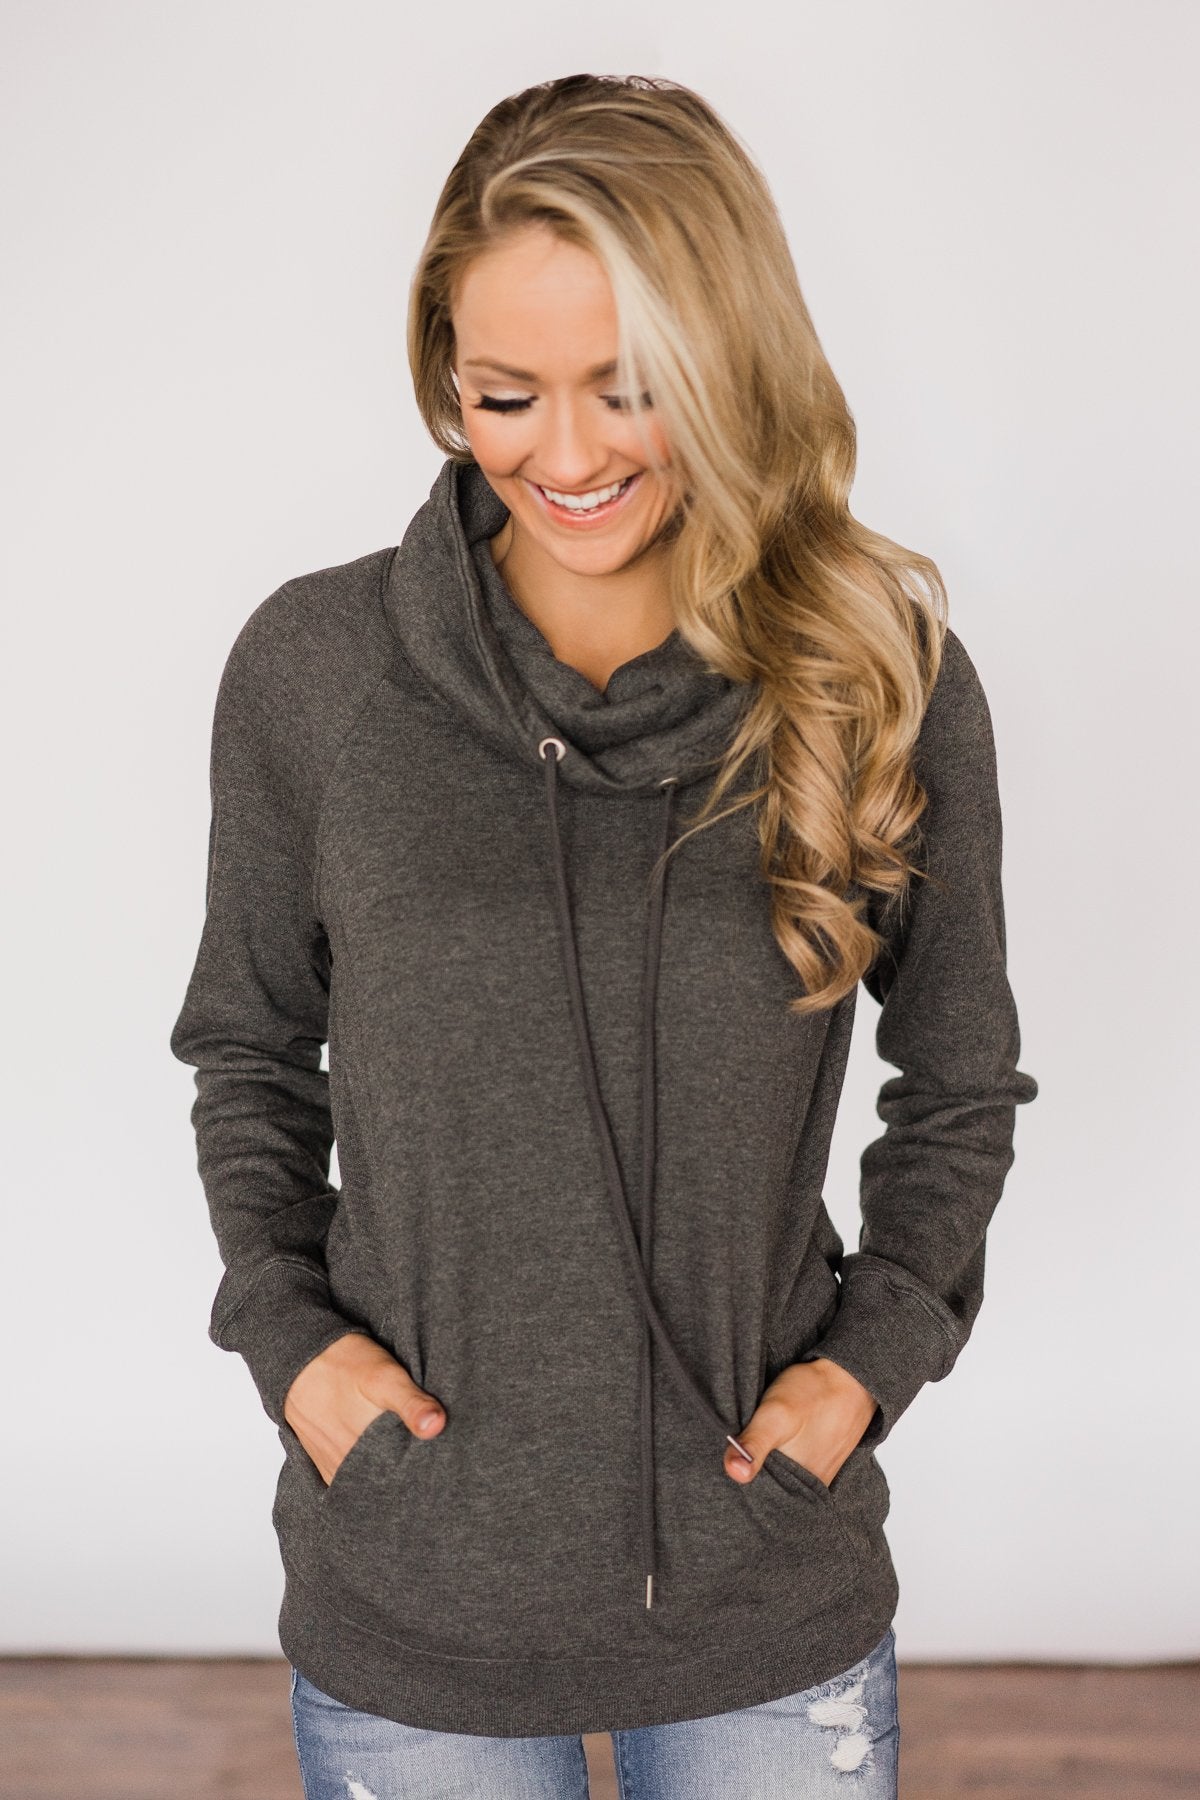 Solid Charcoal Cowl Neck Top – The Pulse Boutique